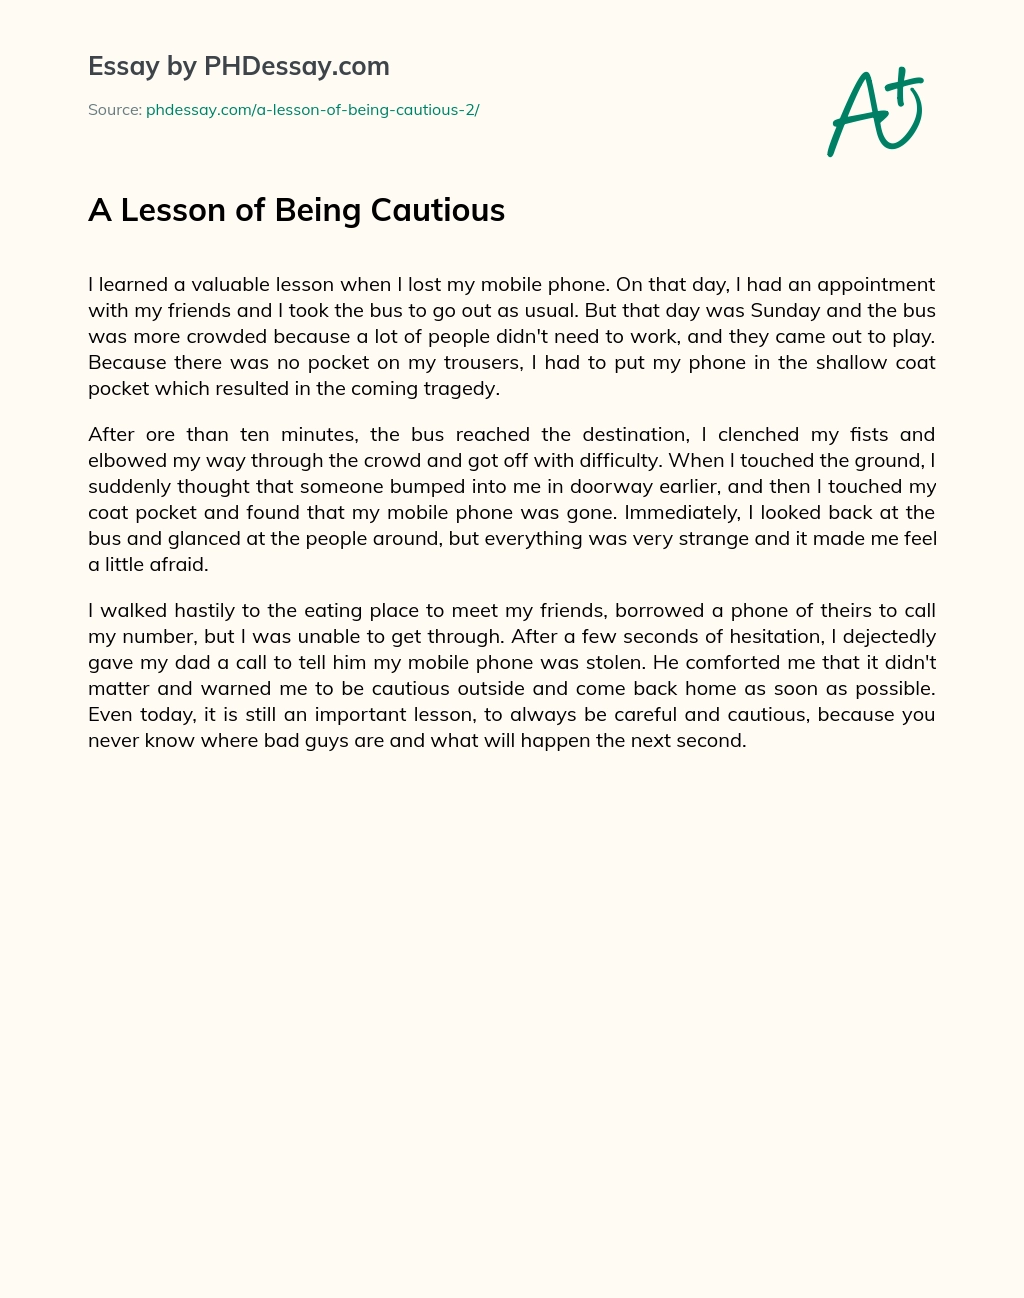 A Lesson of Being Cautious essay